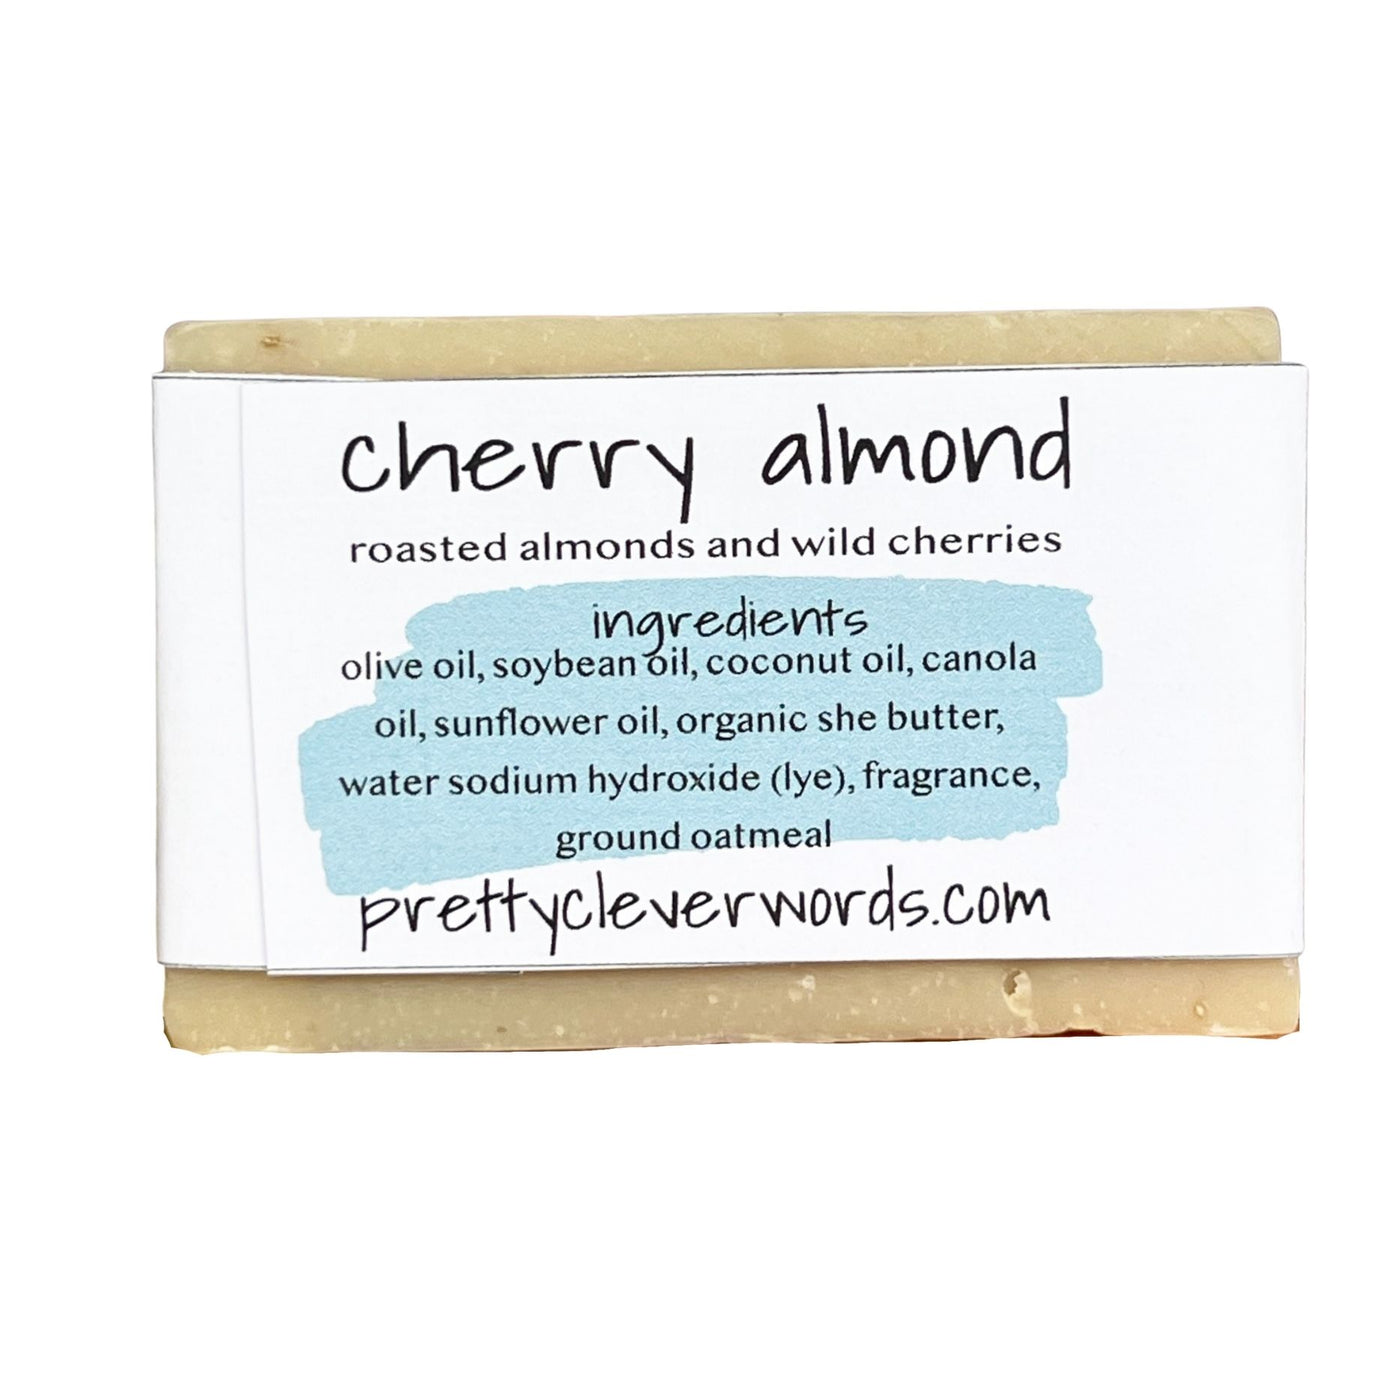 clever+clean cherry almond - uh oh..is that today?